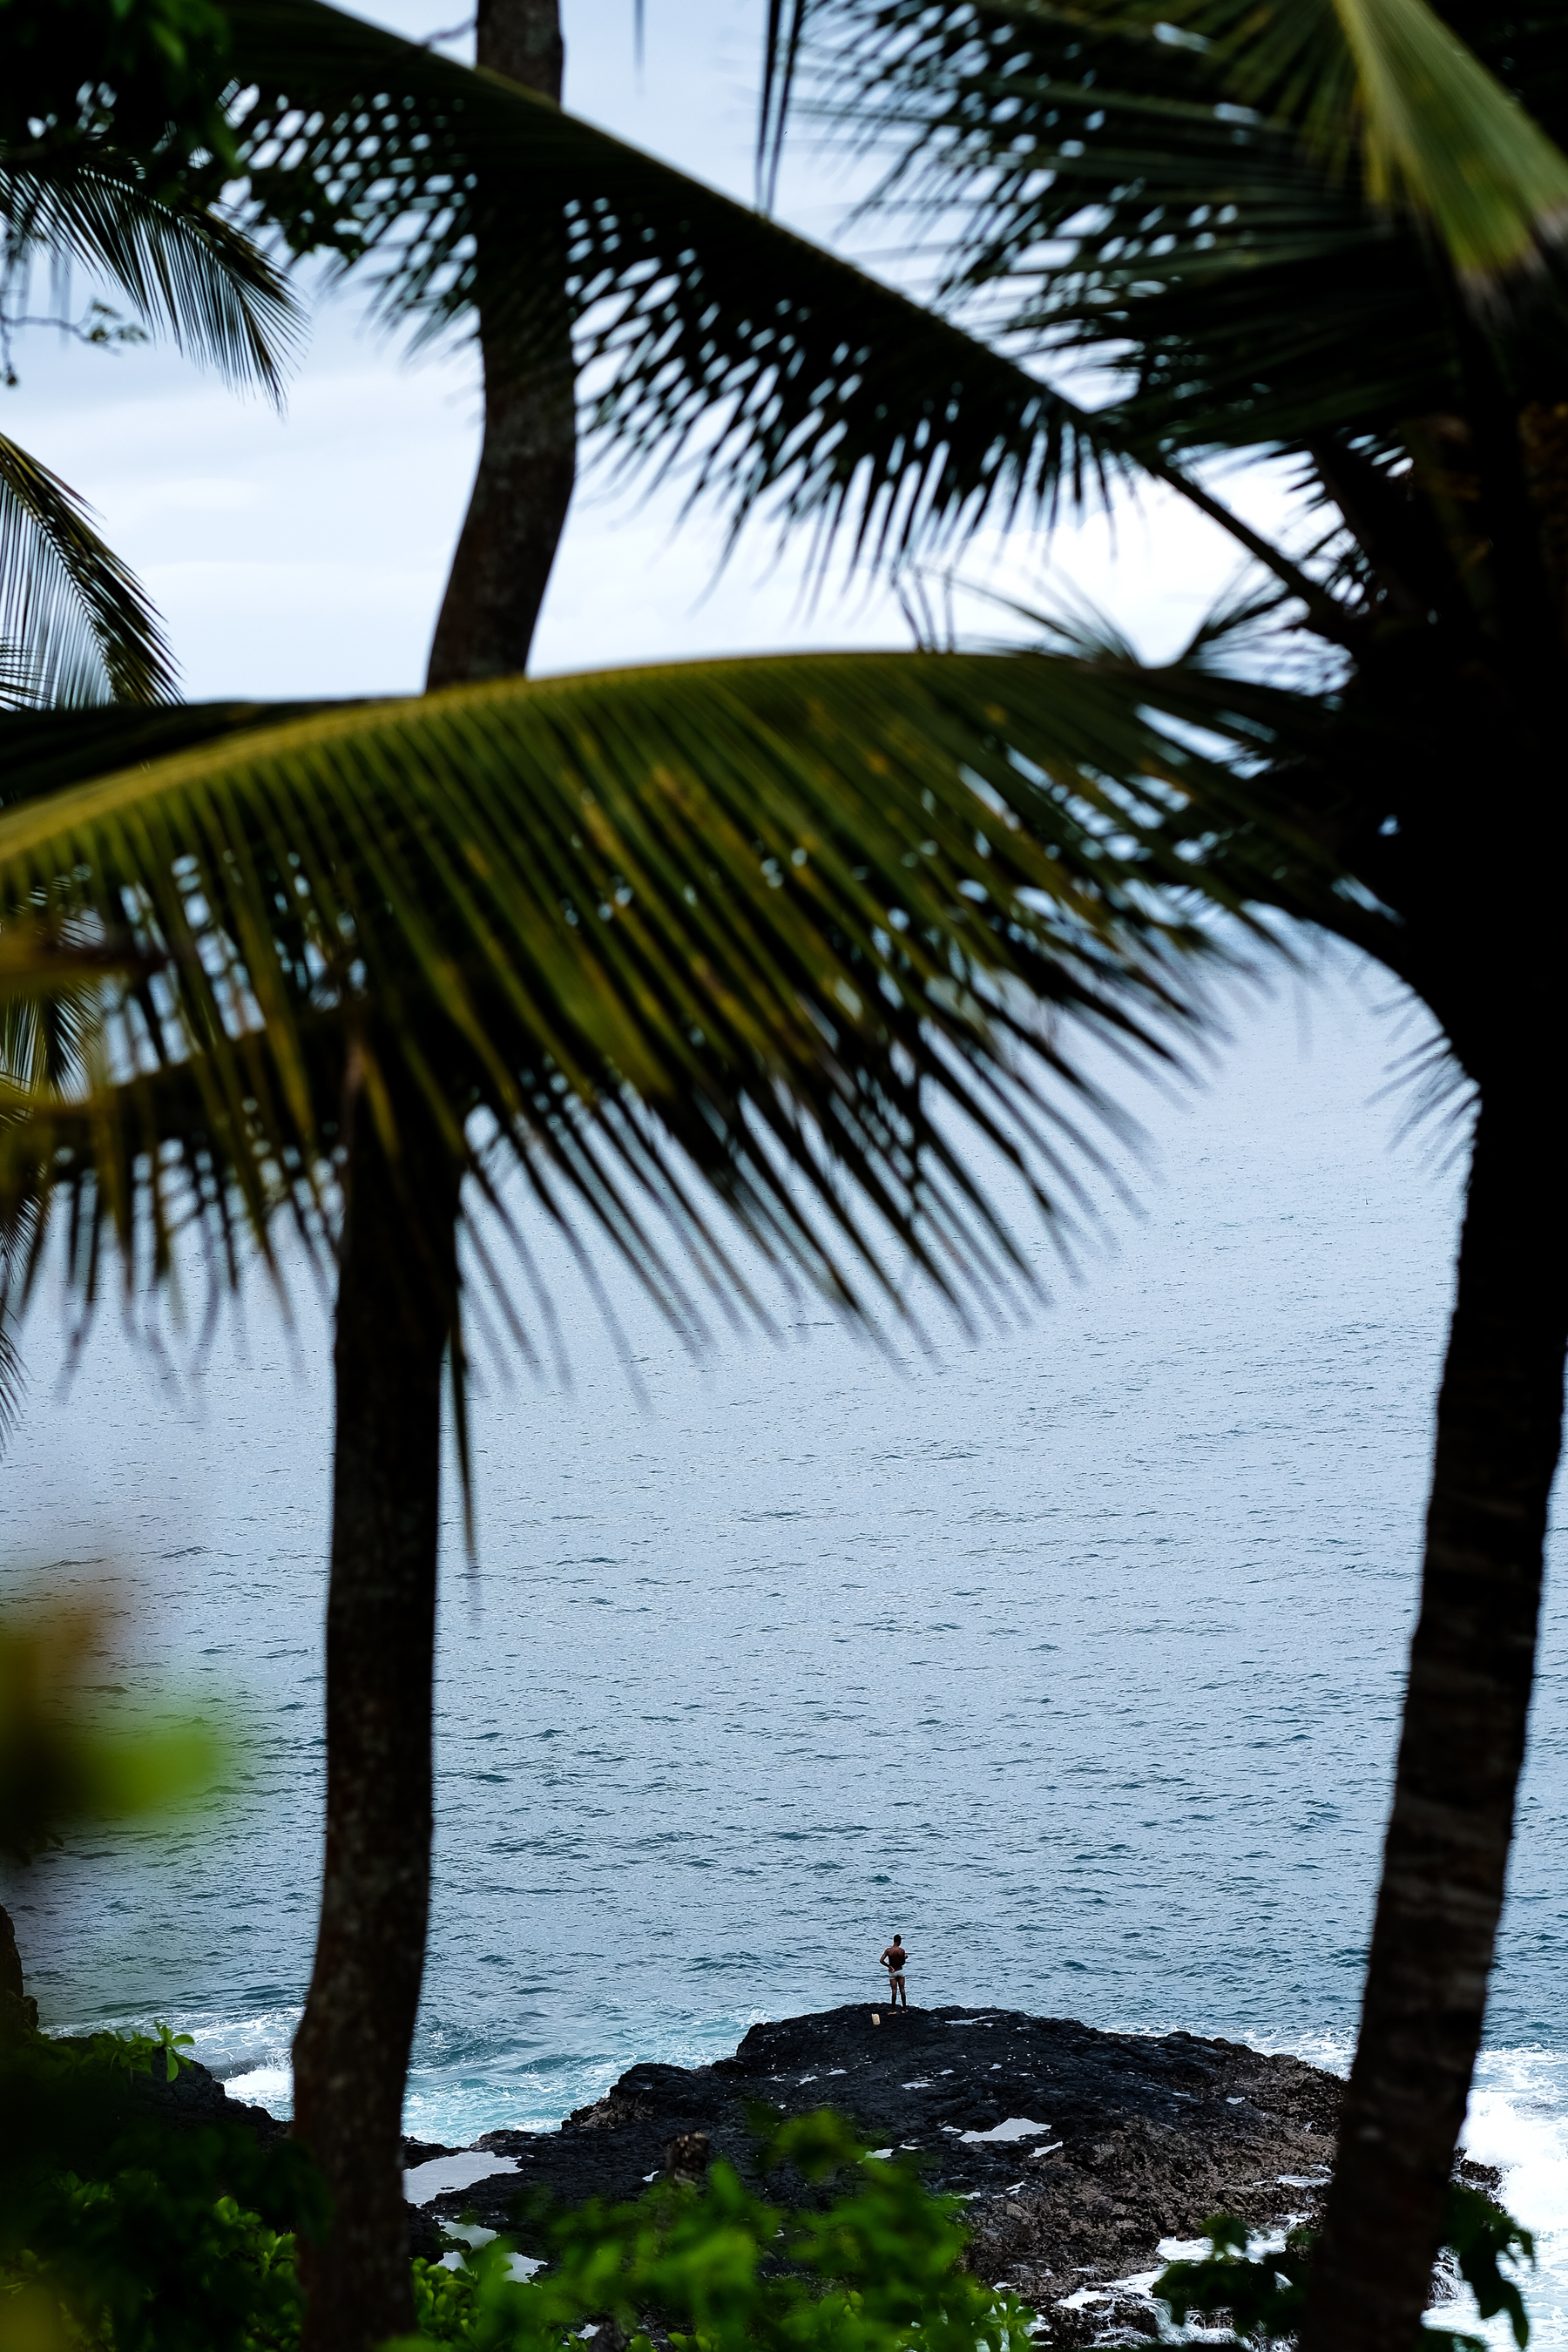 A man stands on a cliff, far from us, looking at the ocean, very small. In the foreground we can see out of focus palm trees. 